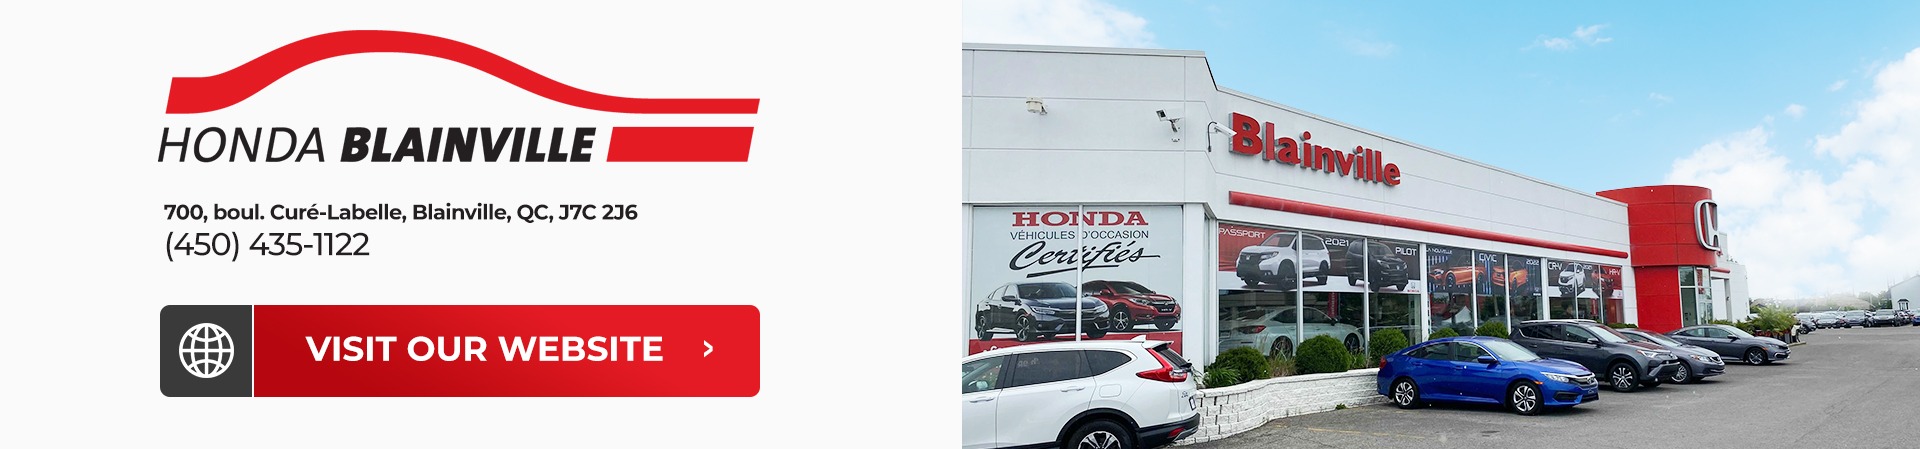 picture of honda blainville dealership with honda vehicles in front